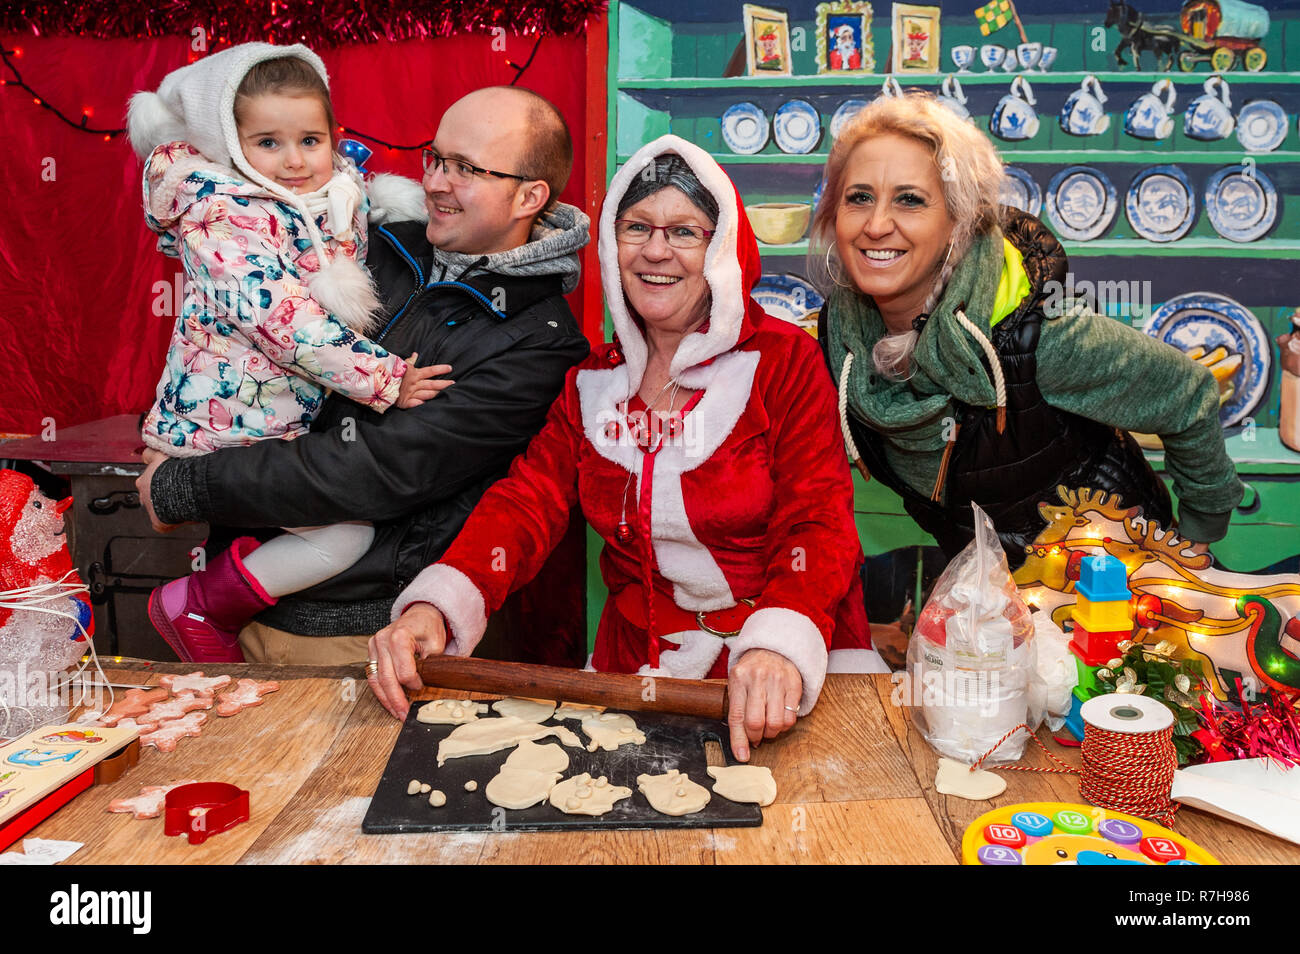 Leap, West Cork, Ireland. 9th Dec, 2018. Santa is appearing at Leap Land up until Christmas.  Leap Land is an annual event facilitated by Ger of the world-famous Ger's Wild Atlantic Diner in Leap.  Helping Mrs Claus with her baking this evening were Alex Siran, Nela Horrathova and Monika Horrathova, all from Clonakilty. Credit: Andy Gibson/Alamy Live News. Stock Photo